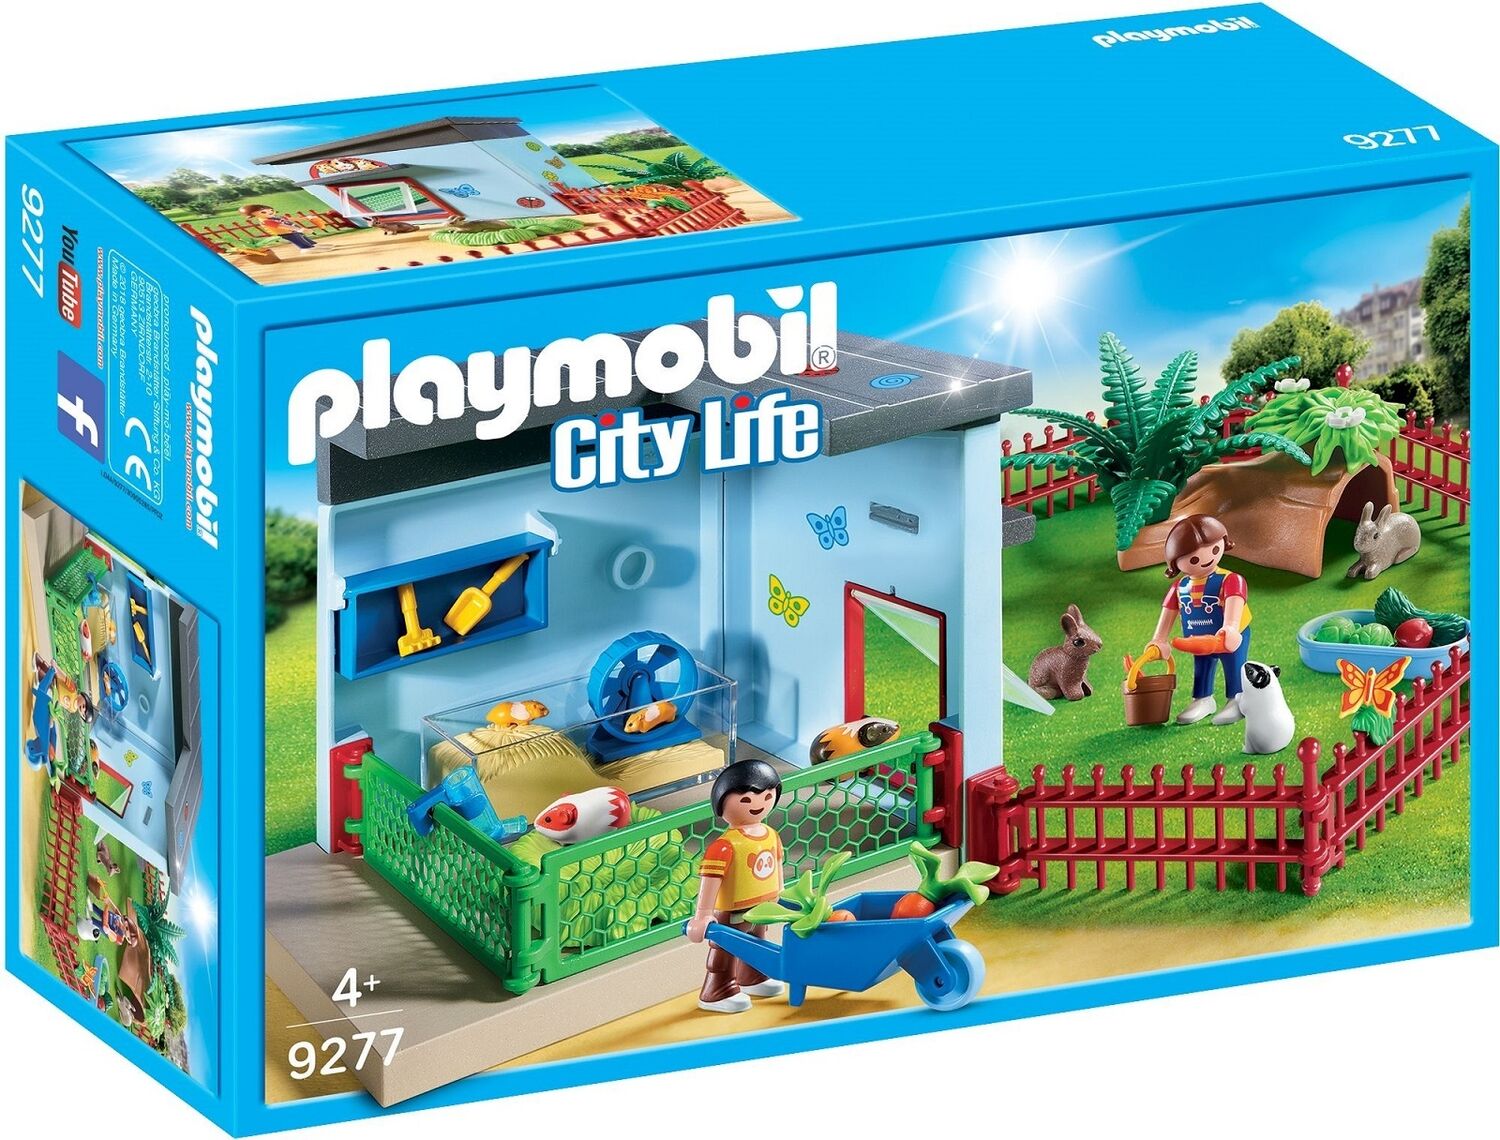 Playmobil Iron for modern house / hotel / laundry city life Blue 